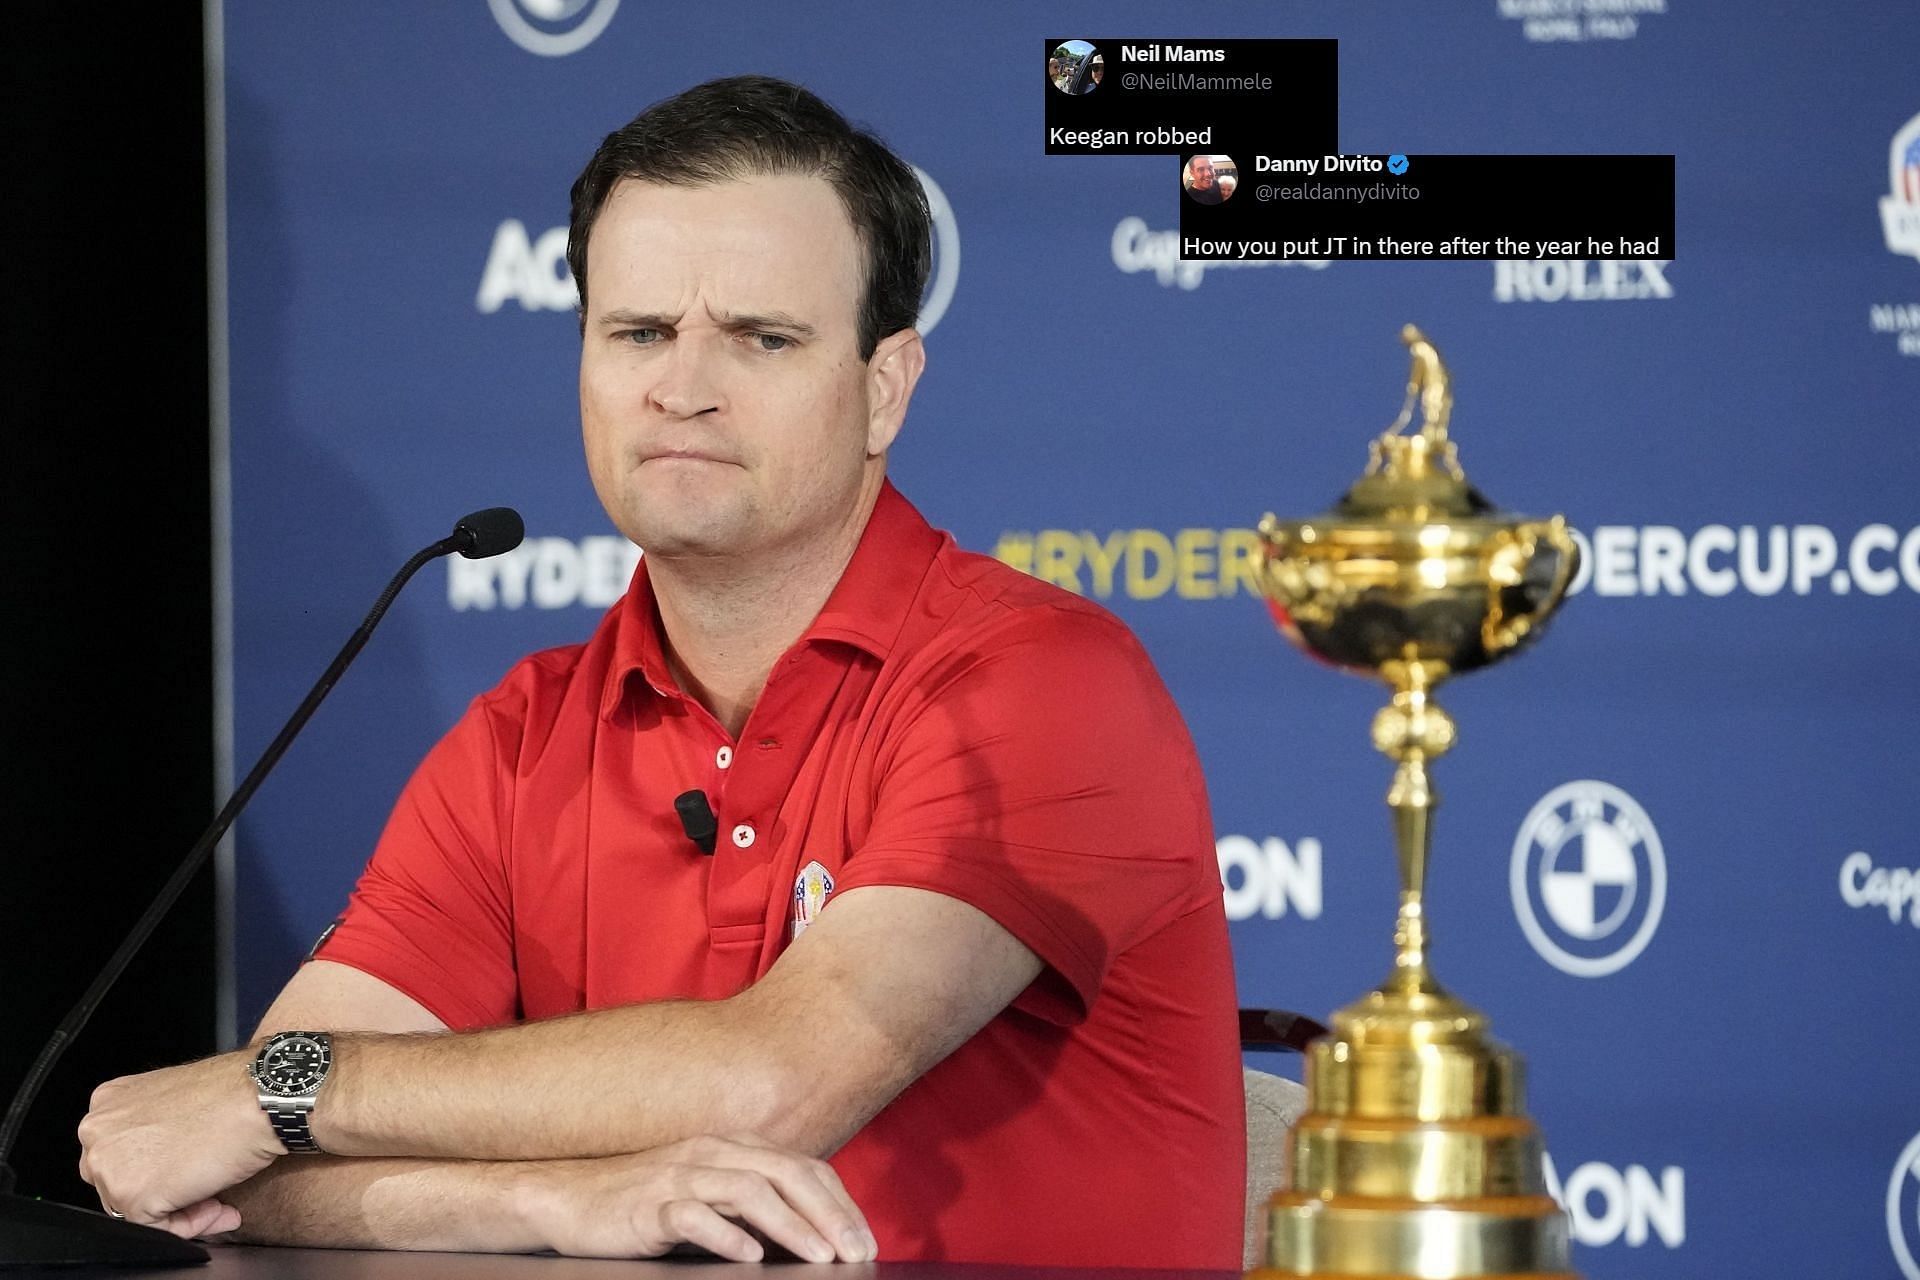 “Keegan robbed” Fans react to reports of the 2023 US Ryder Cup Team